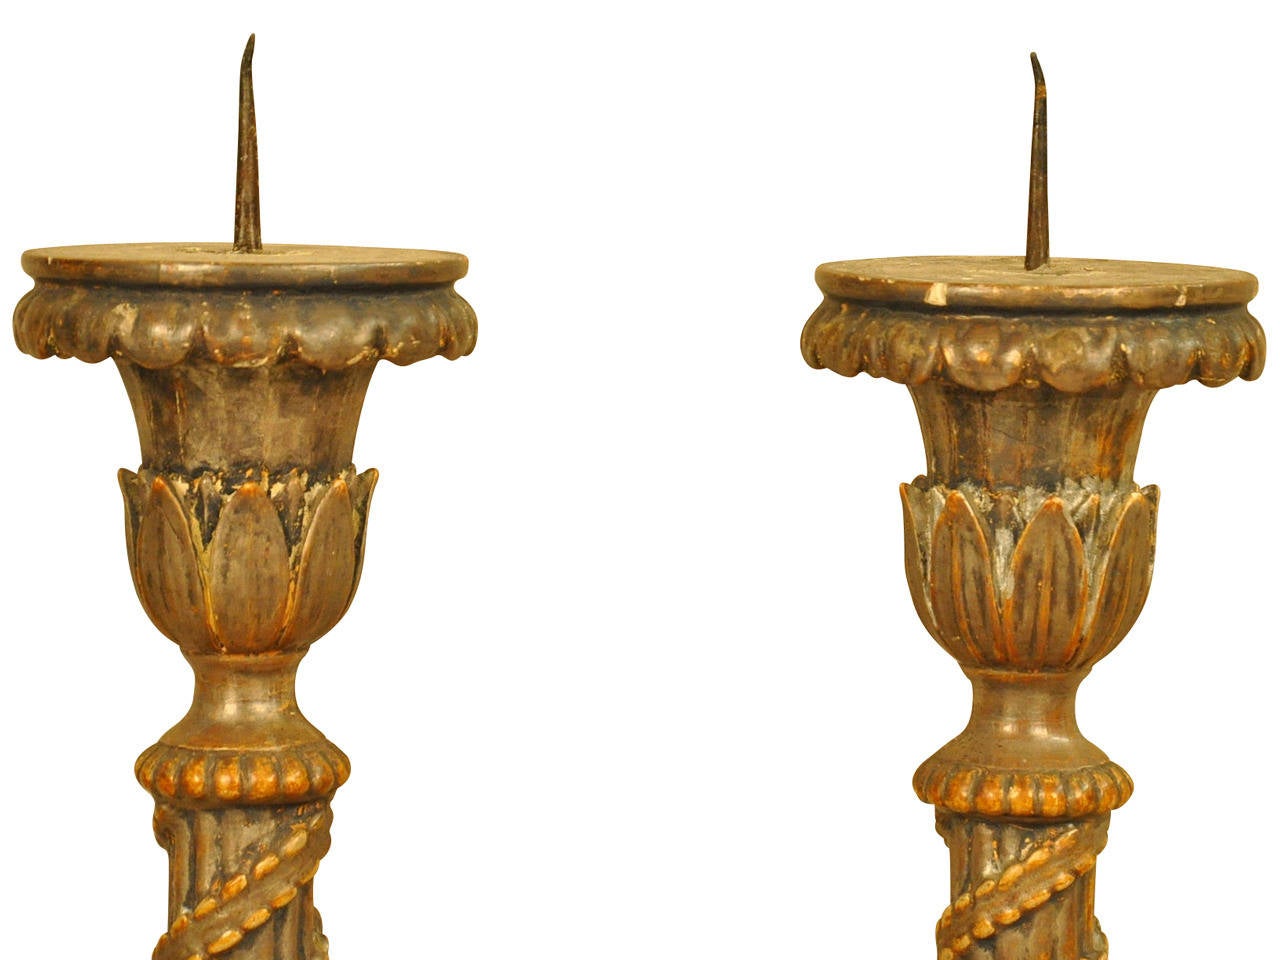 A very handsome pair of late 18th century Italian altar sticks / prickets in polychromed wood with traces of silver.  Wonderful to use as candlesticks or to convert into lamps.